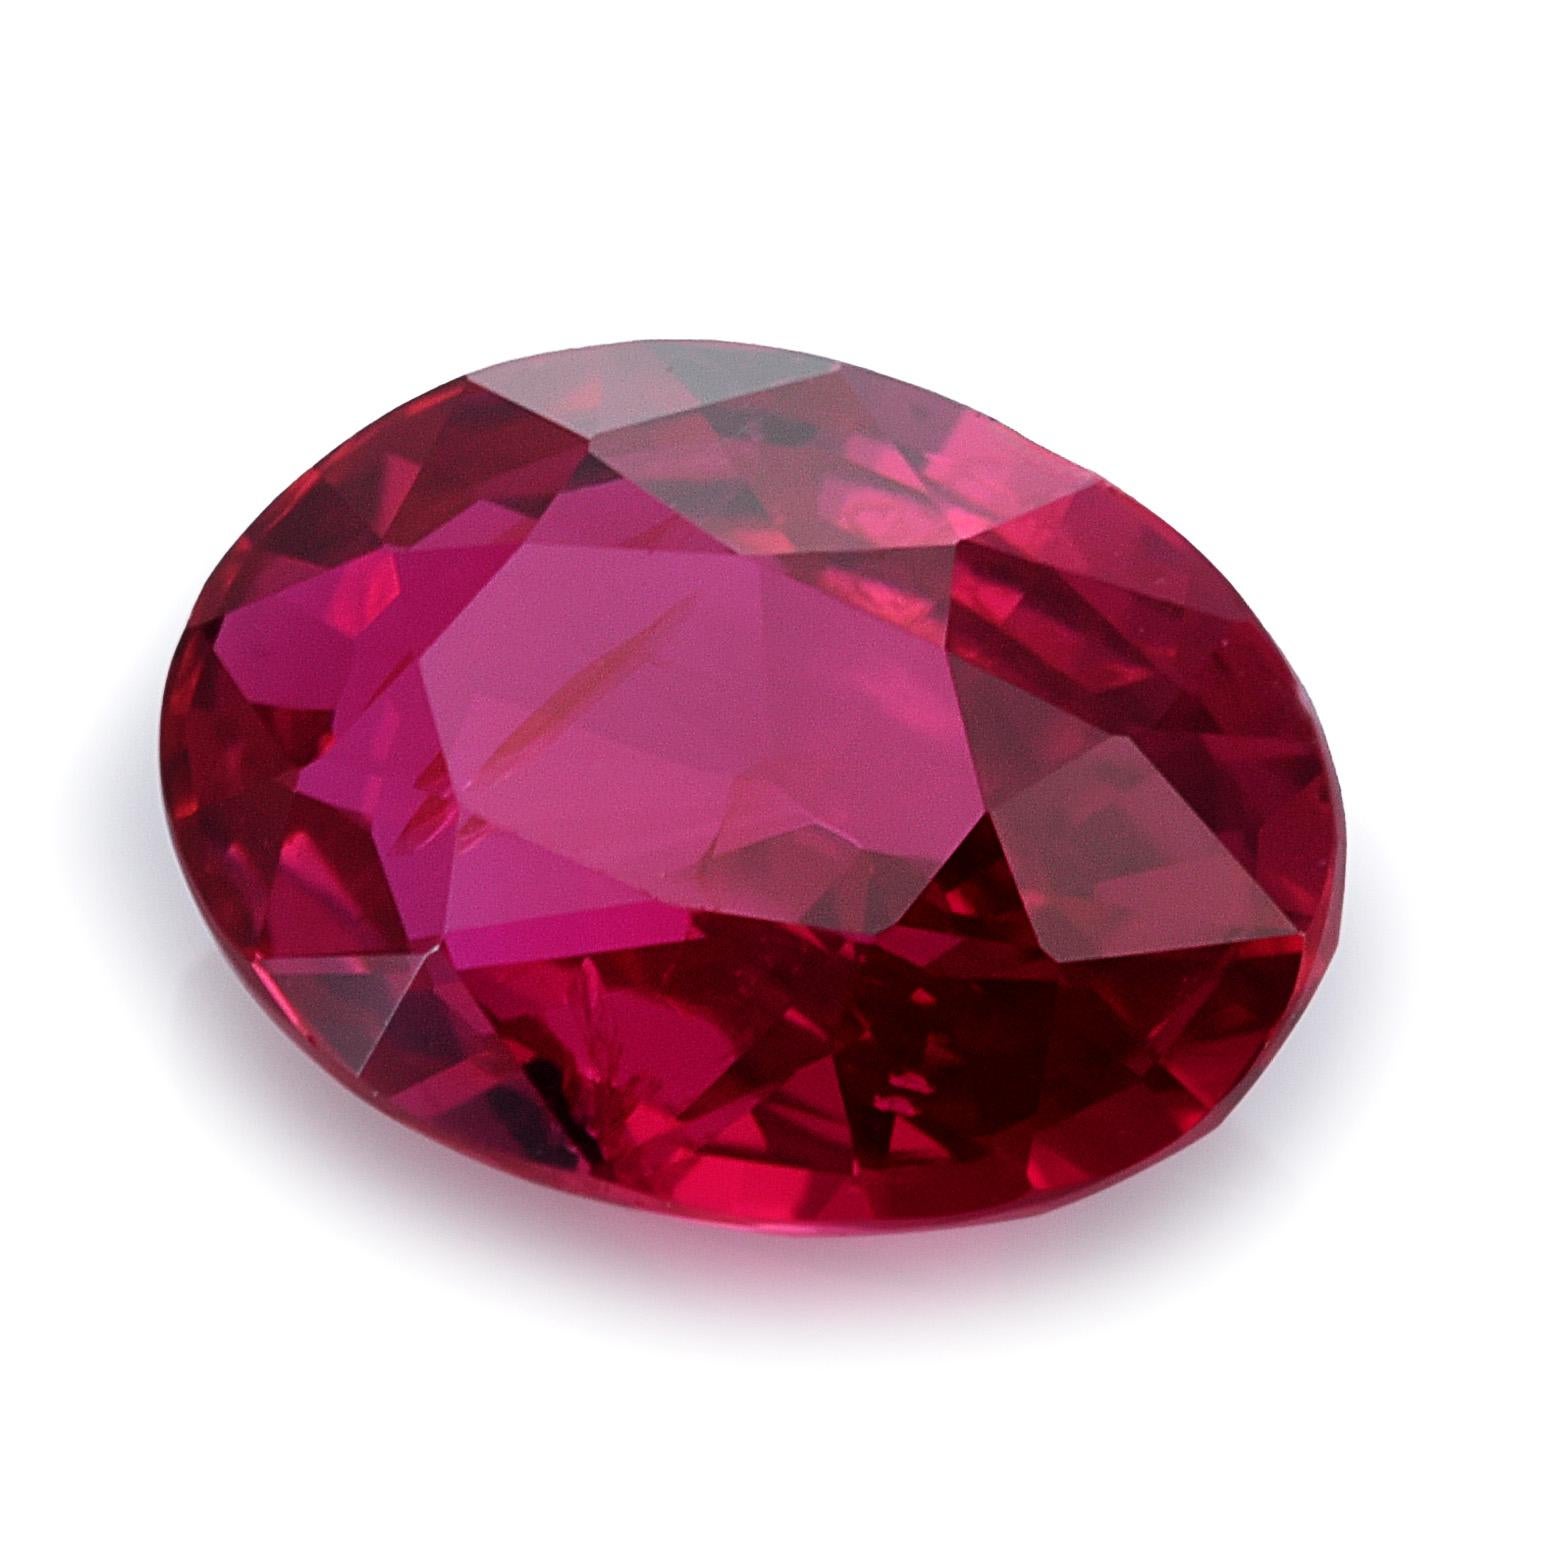 Mixed Cut GIA Certified 1.24 Carats Unheated Mozambique Ruby For Sale